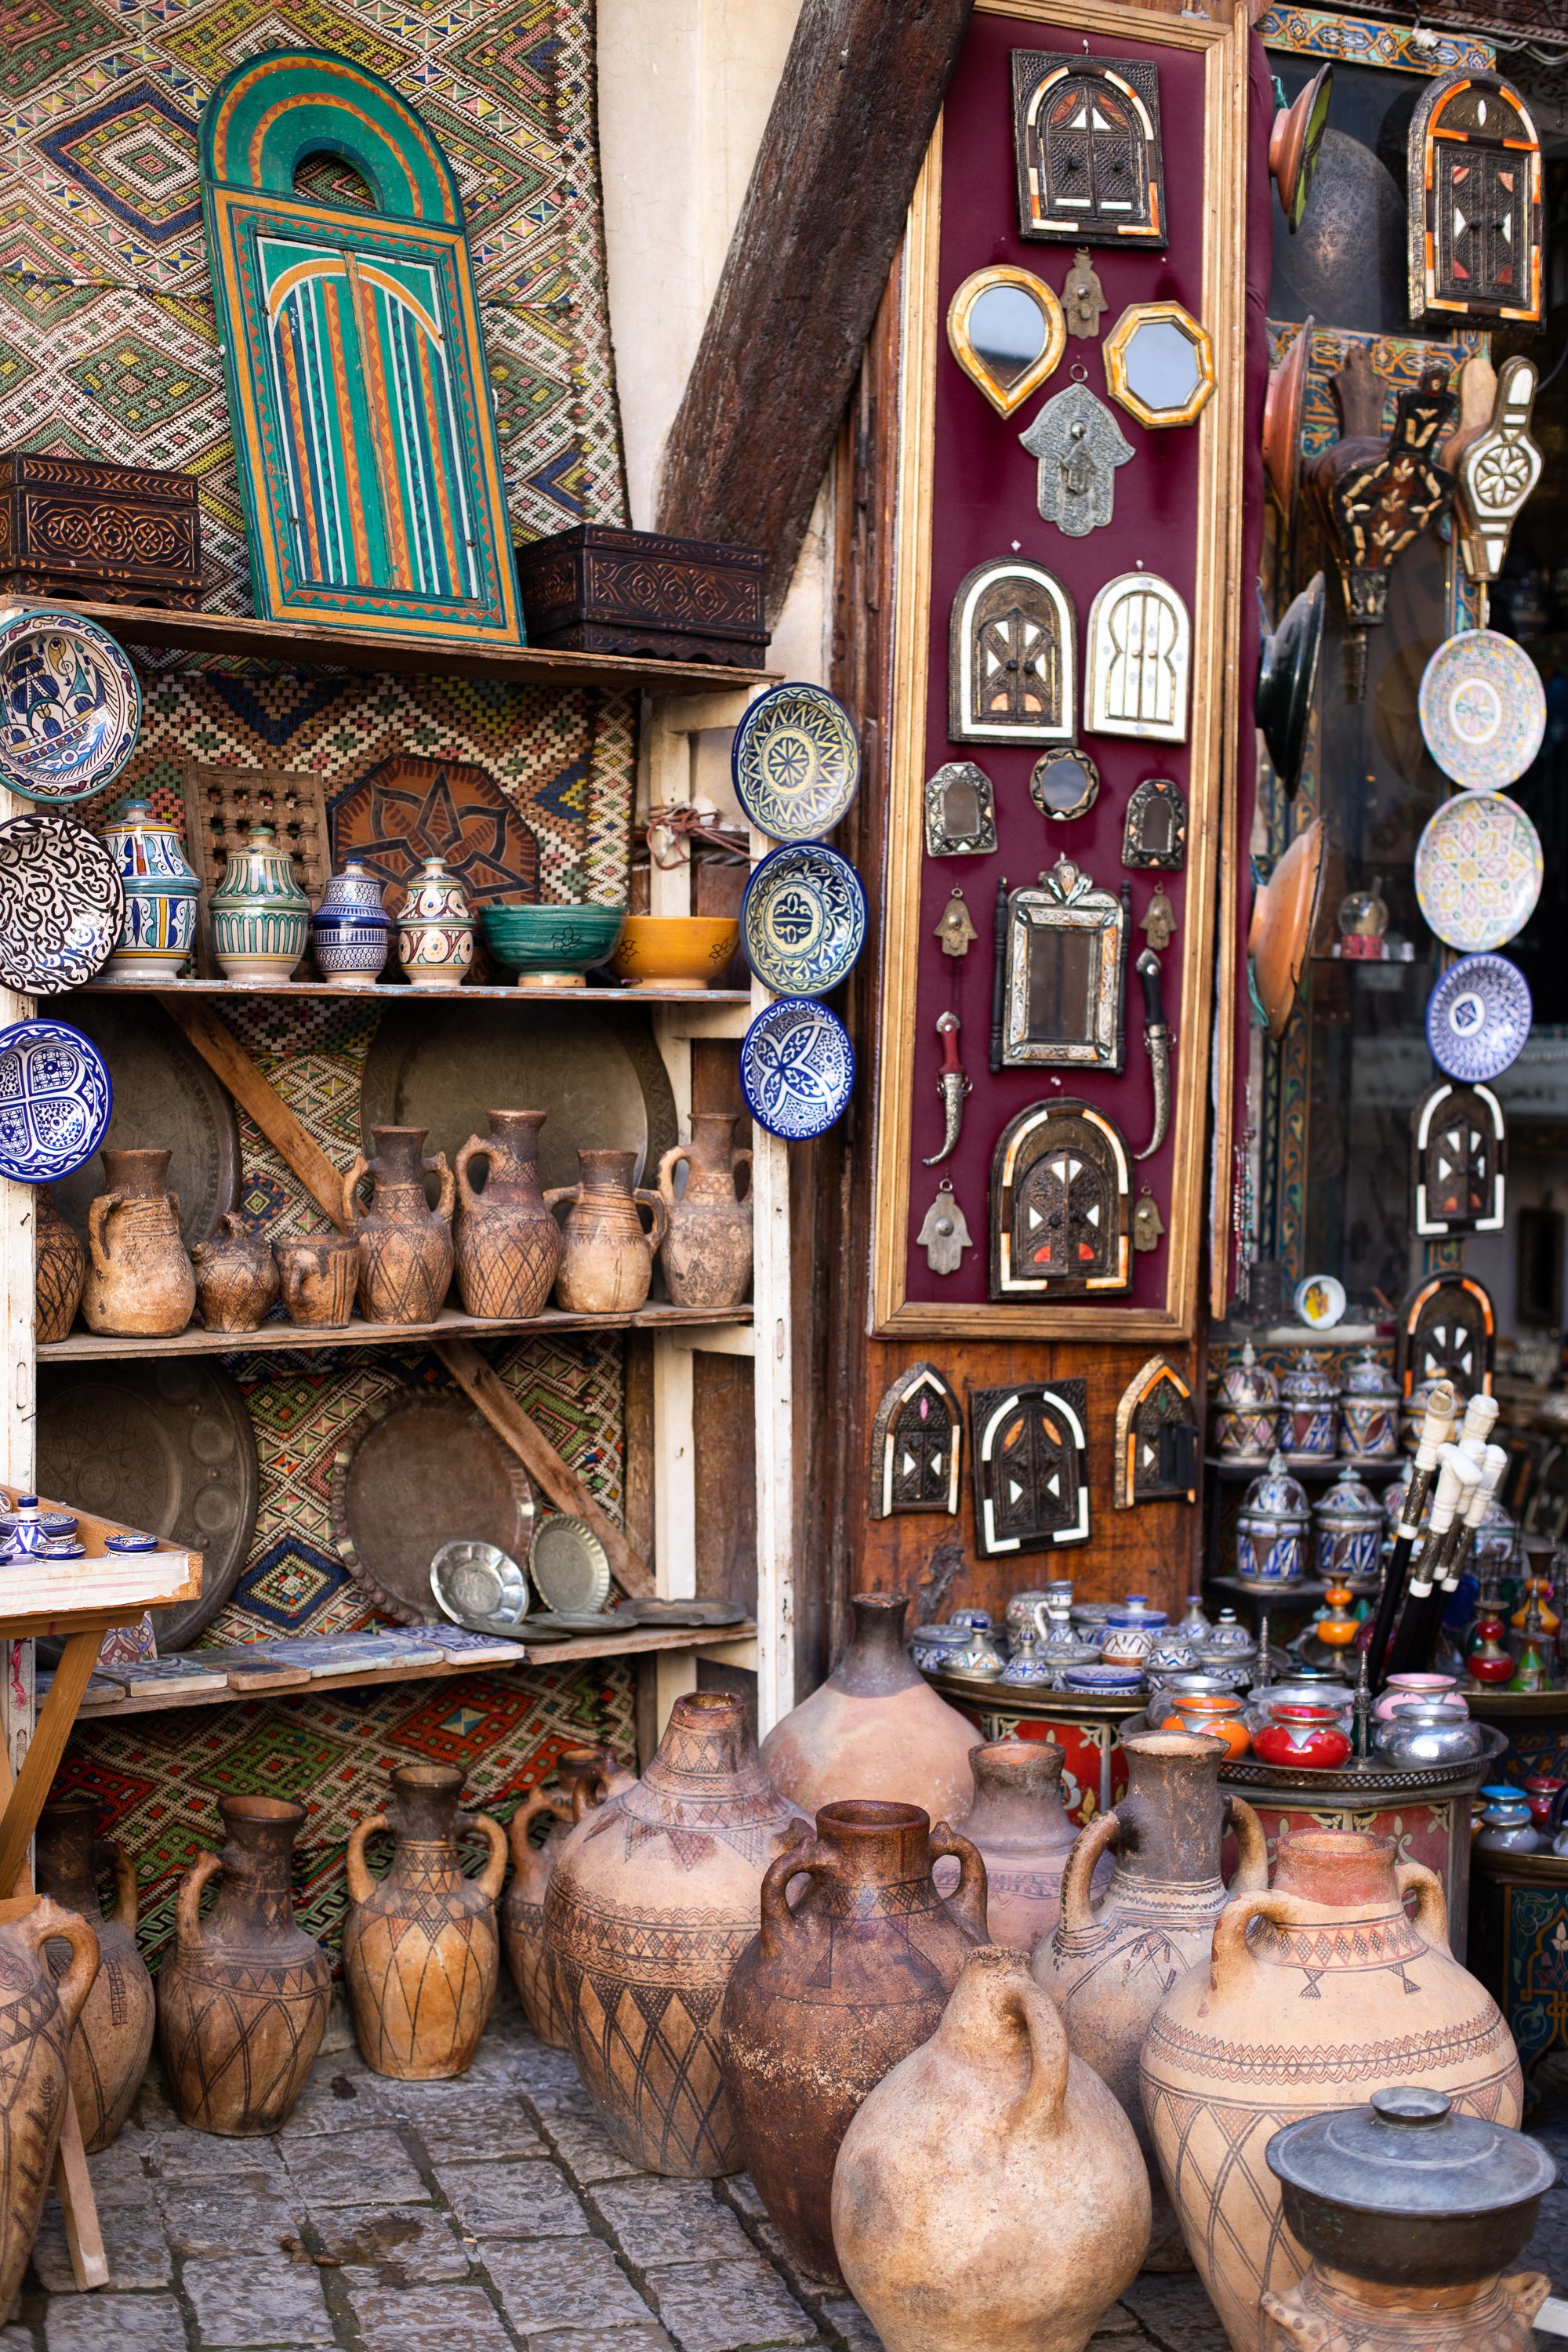 fes morocco, fez morocco, where to go in morocco, what to do in morocco, best cities in morocco, oldest tannery in the world, moroccan culture, moroccan design, fes medina, fez medina, medina guide, shopping in morocco, shopping in fes, leather tannery fes, clay pottery fes, tile art fes, copper in fes